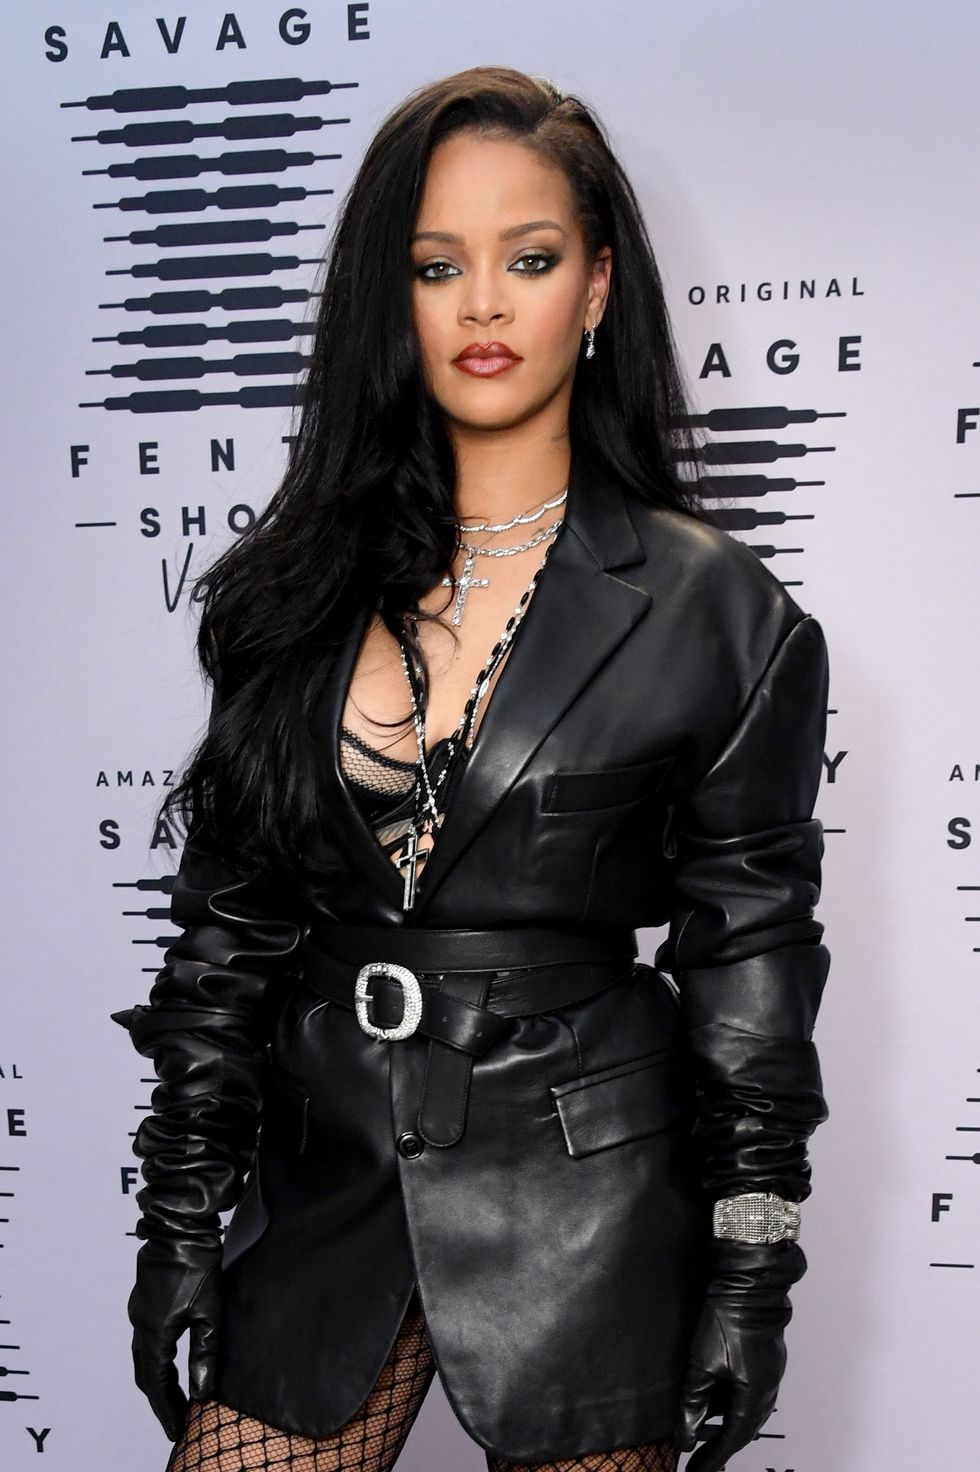 Savage X Fenty: Best and Wildest Looks From Rihanna's Fashion Show